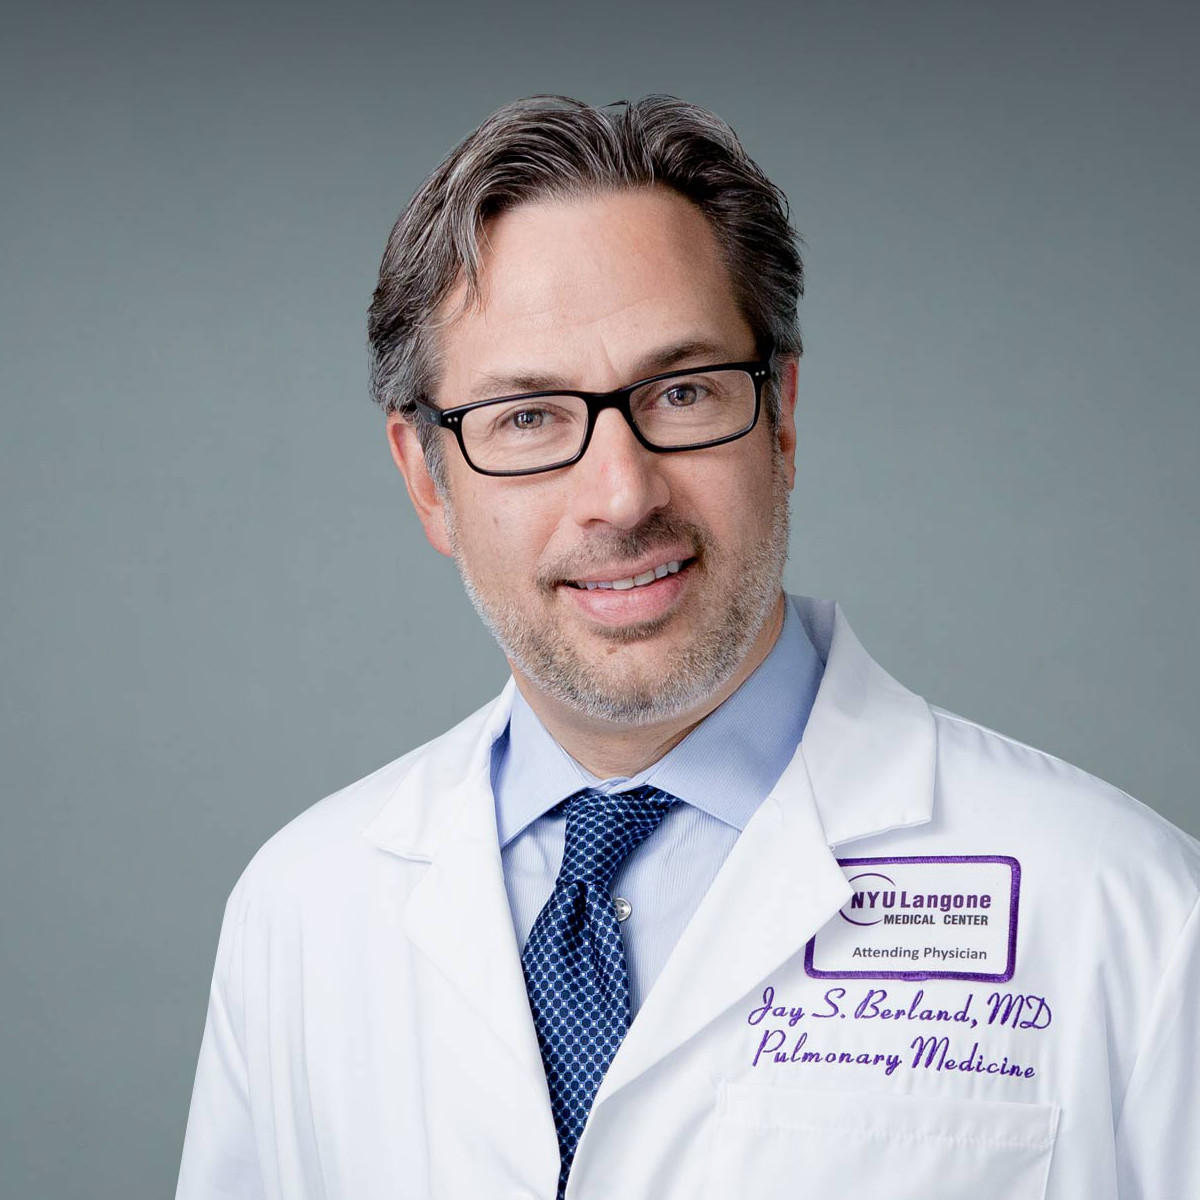 Dr. Jay S. Berland, MD